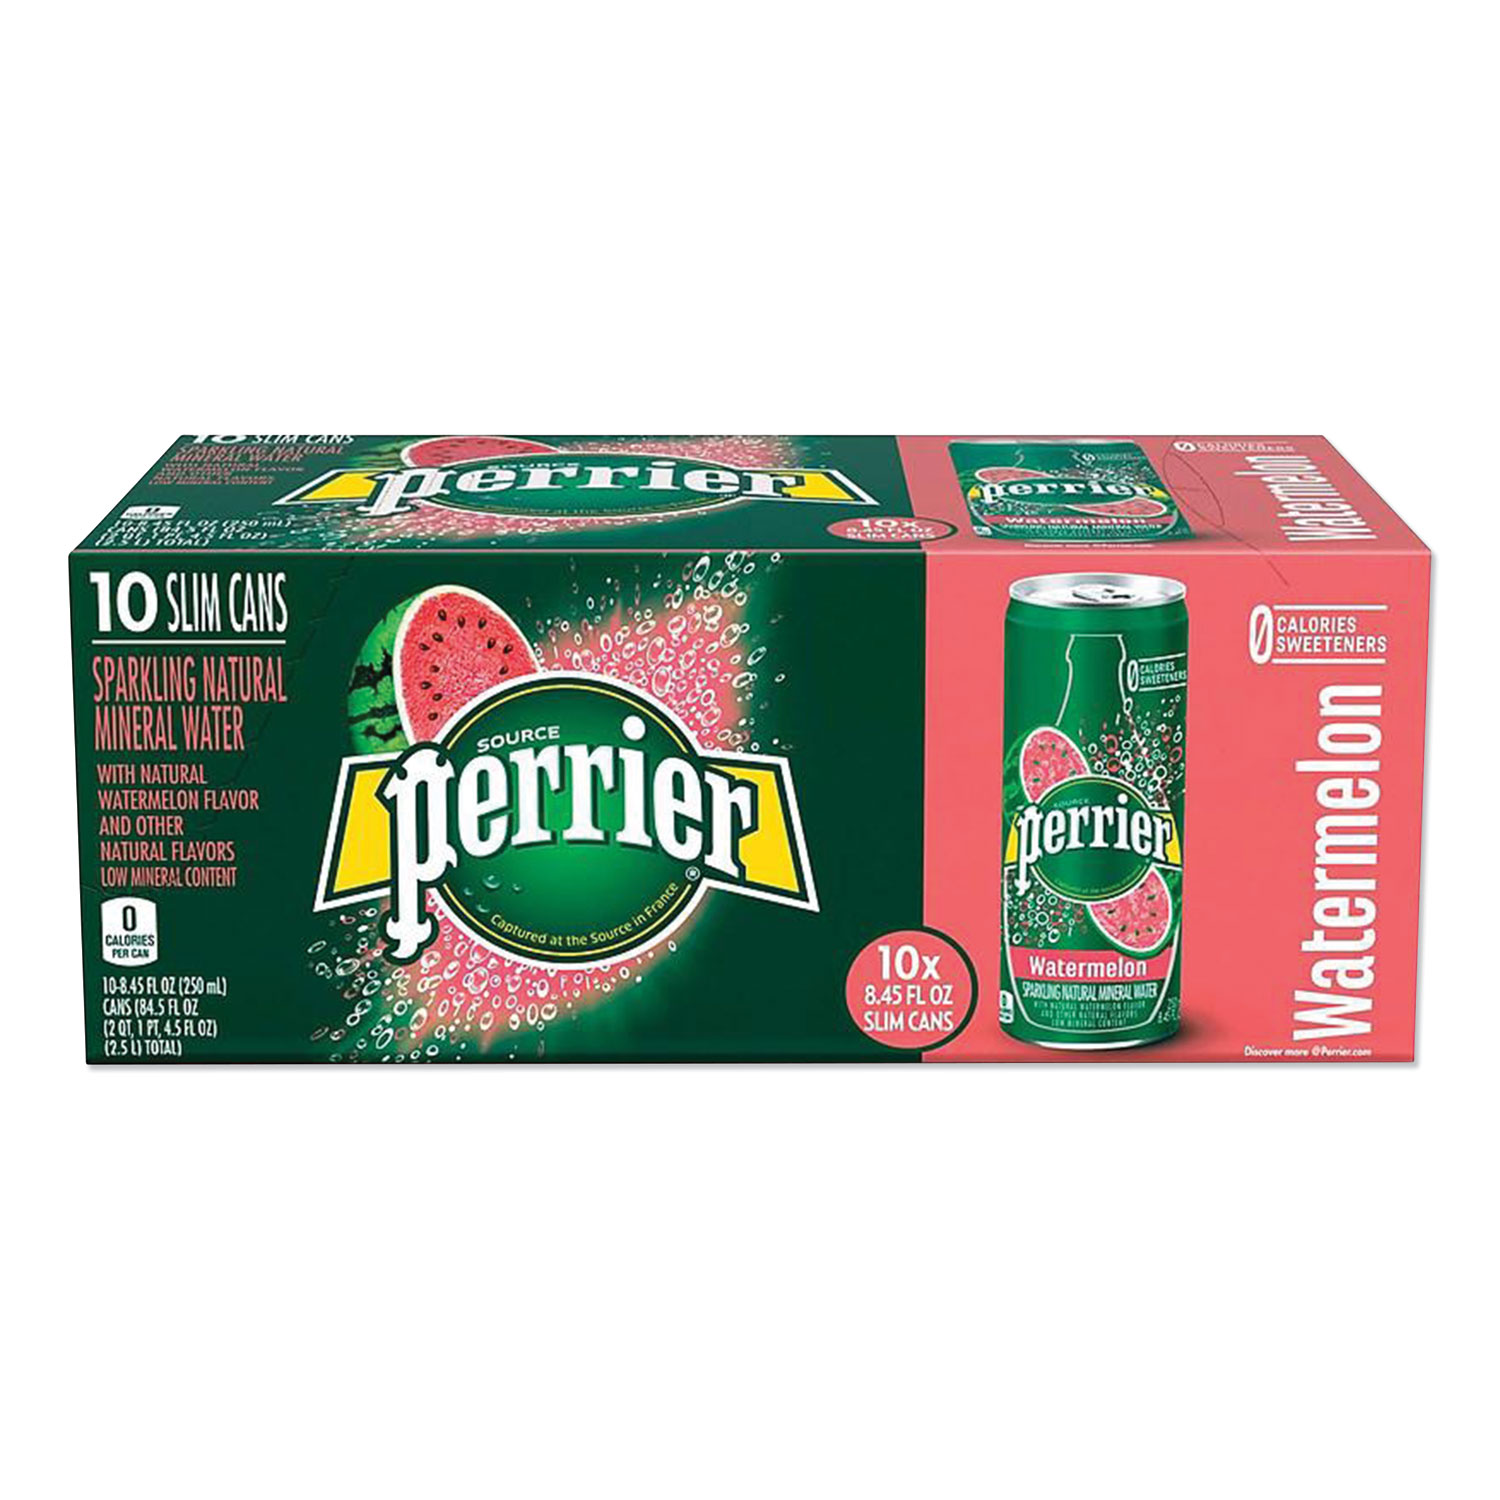  Perrier 12317895 Sparkling Natural Mineral Water, Watermelon, 8.45 oz Can, 10 Cans/Pack (PRR2618606) 